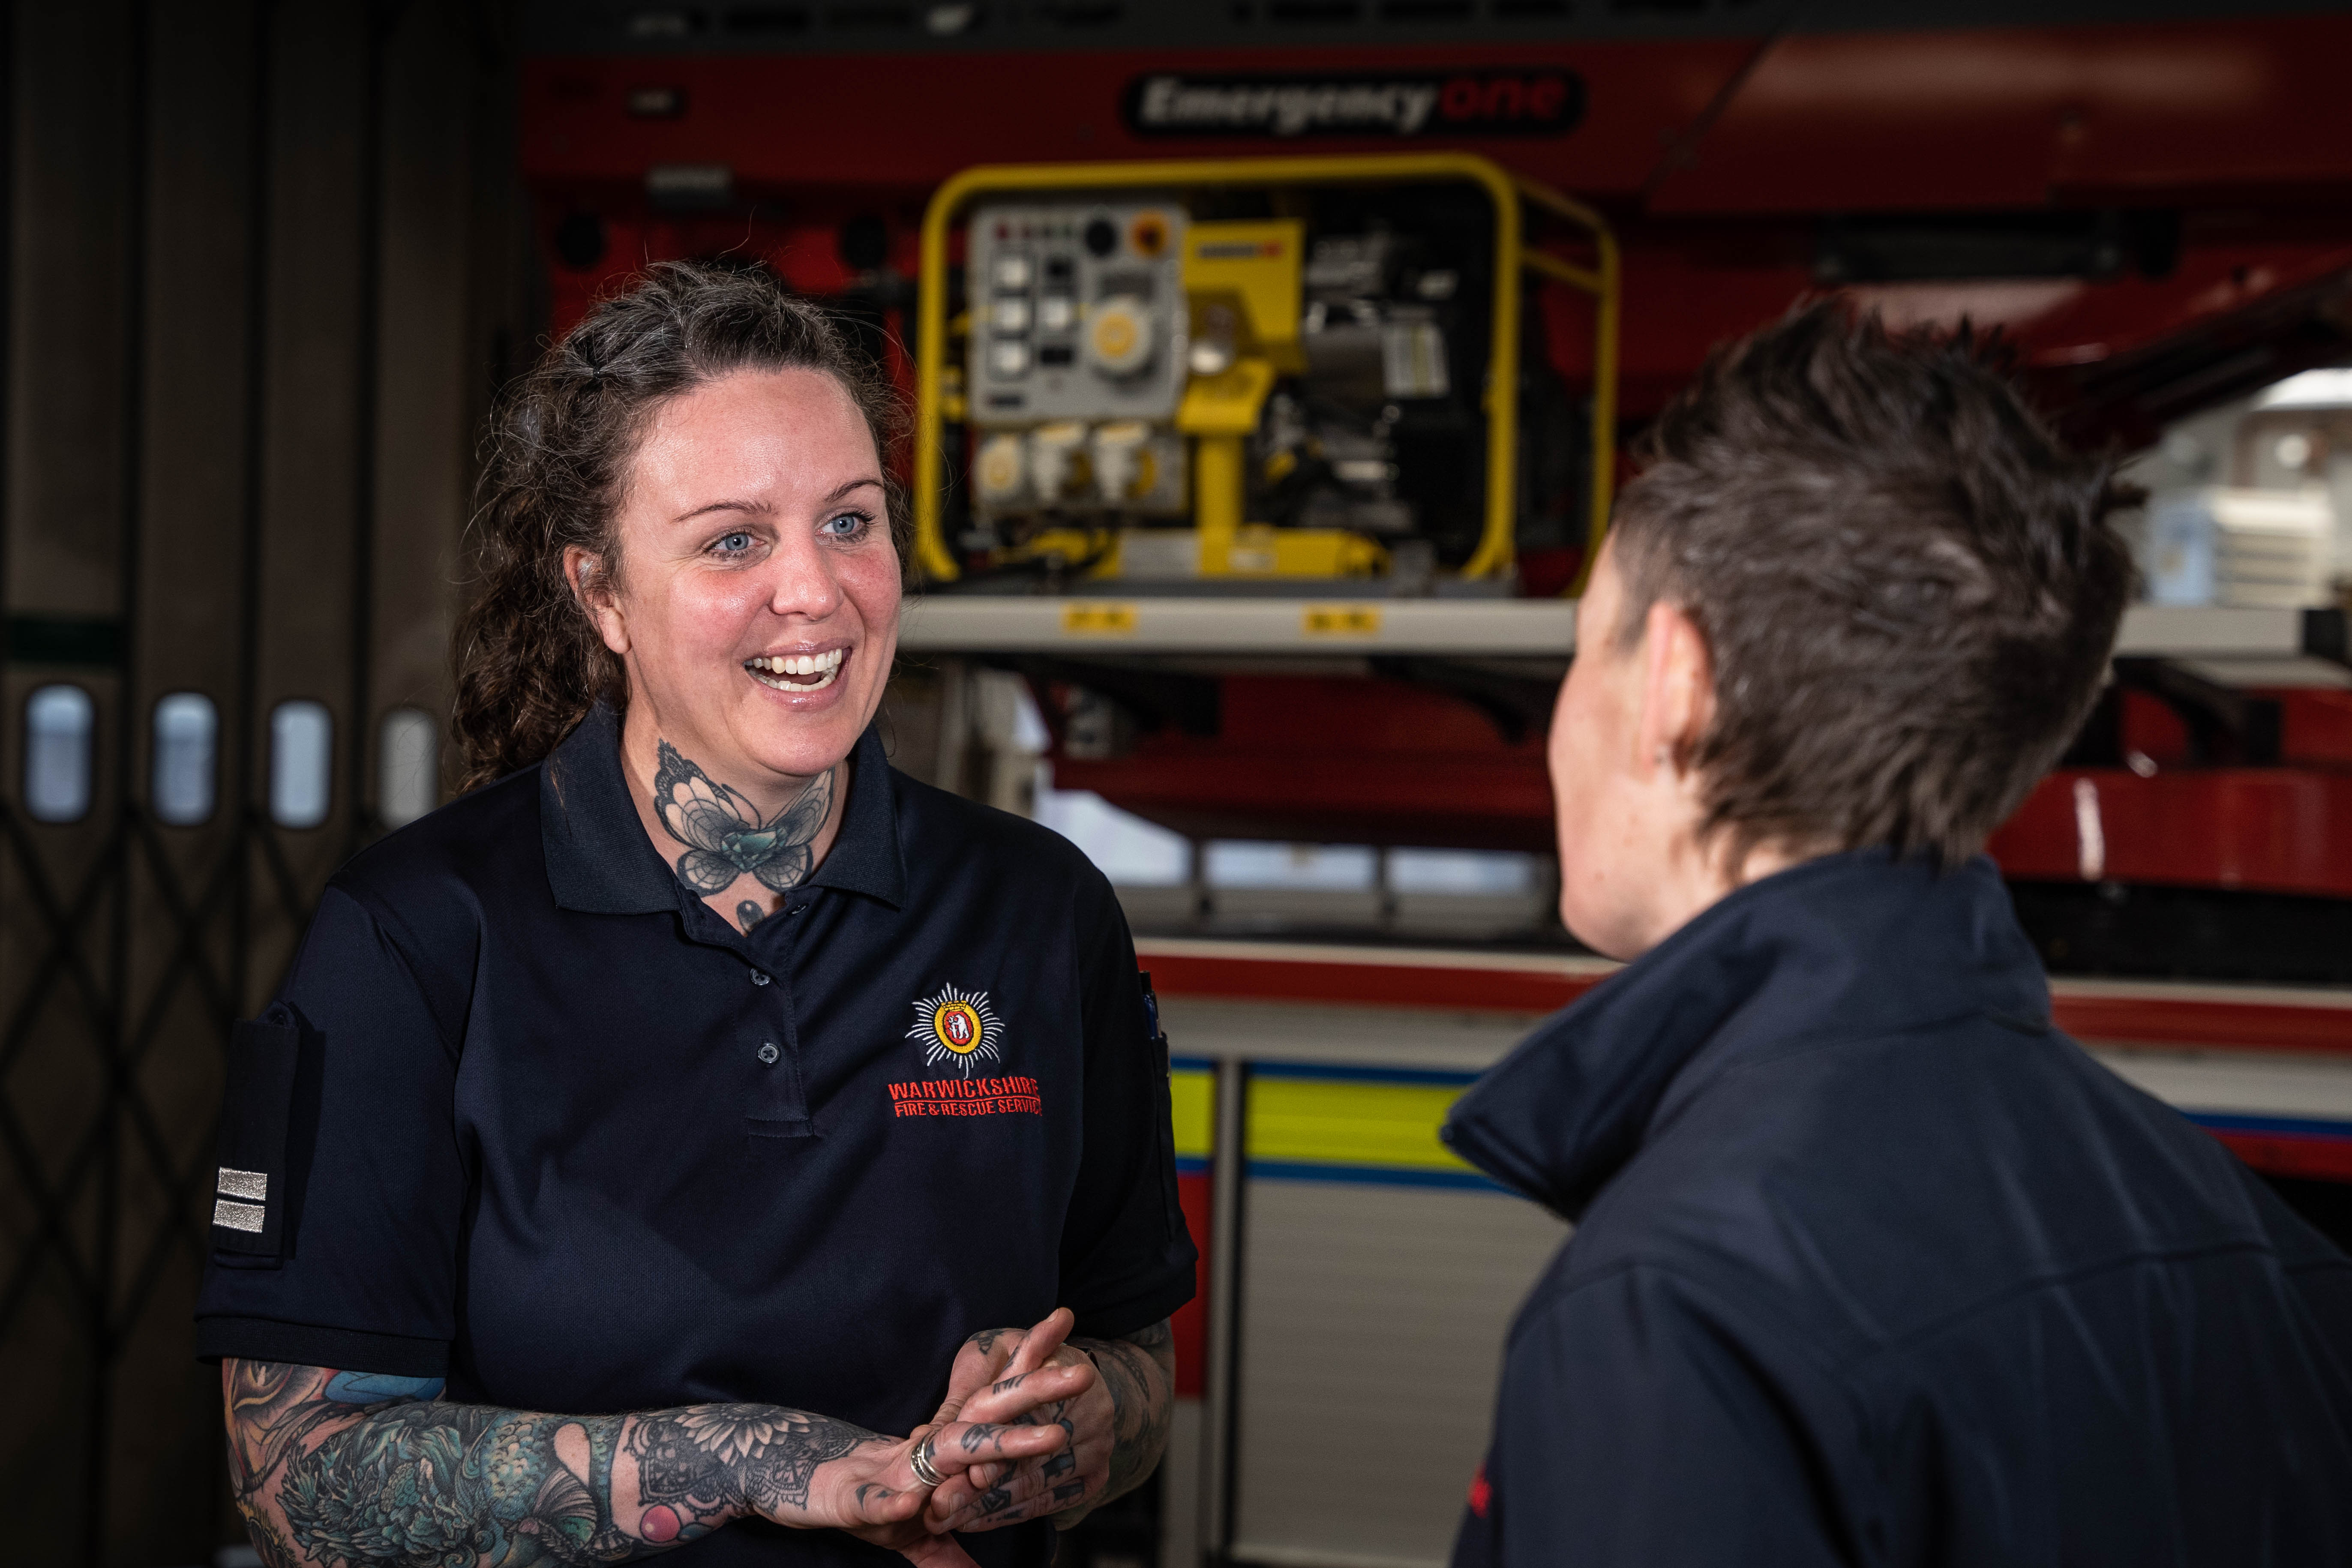 Dawn Roodhouse, Crew Manager at Warwickshire Fire & Rescue Service pictured speaking with another firefighter in front of a fire engine